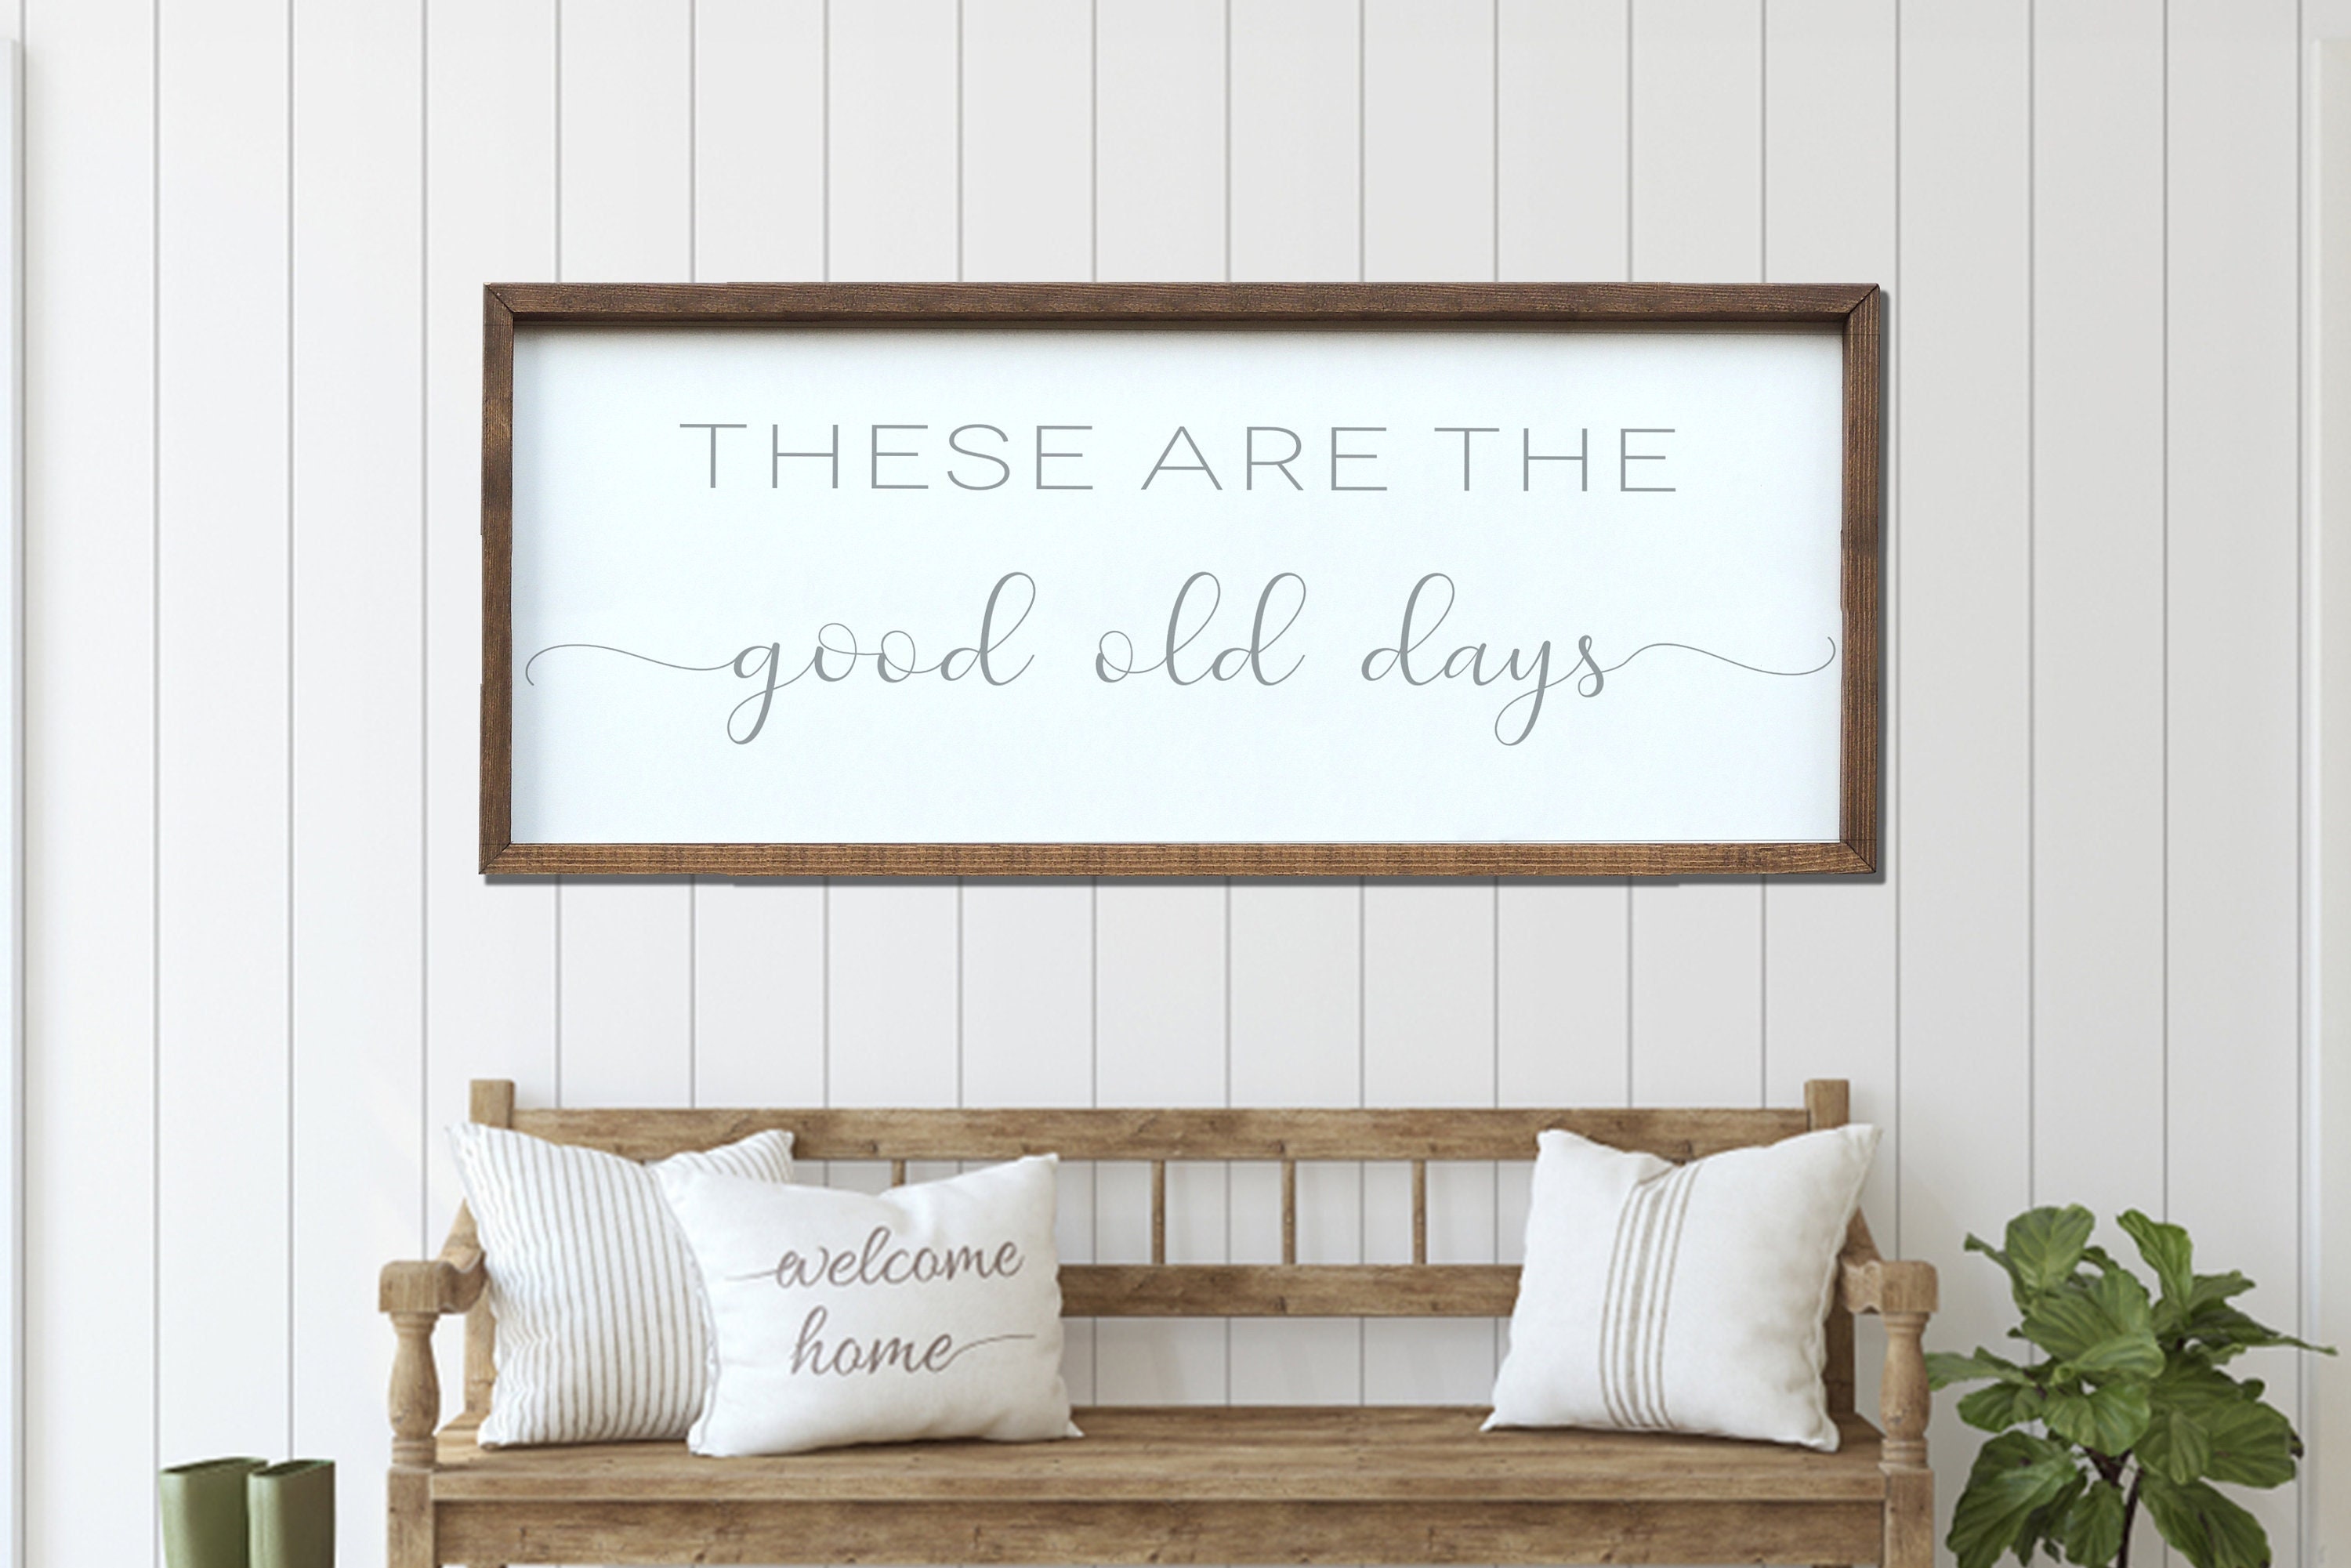 for our family Inspirational wall art Living Room above couch wall decor  Family quote sign family sayings wall decor 